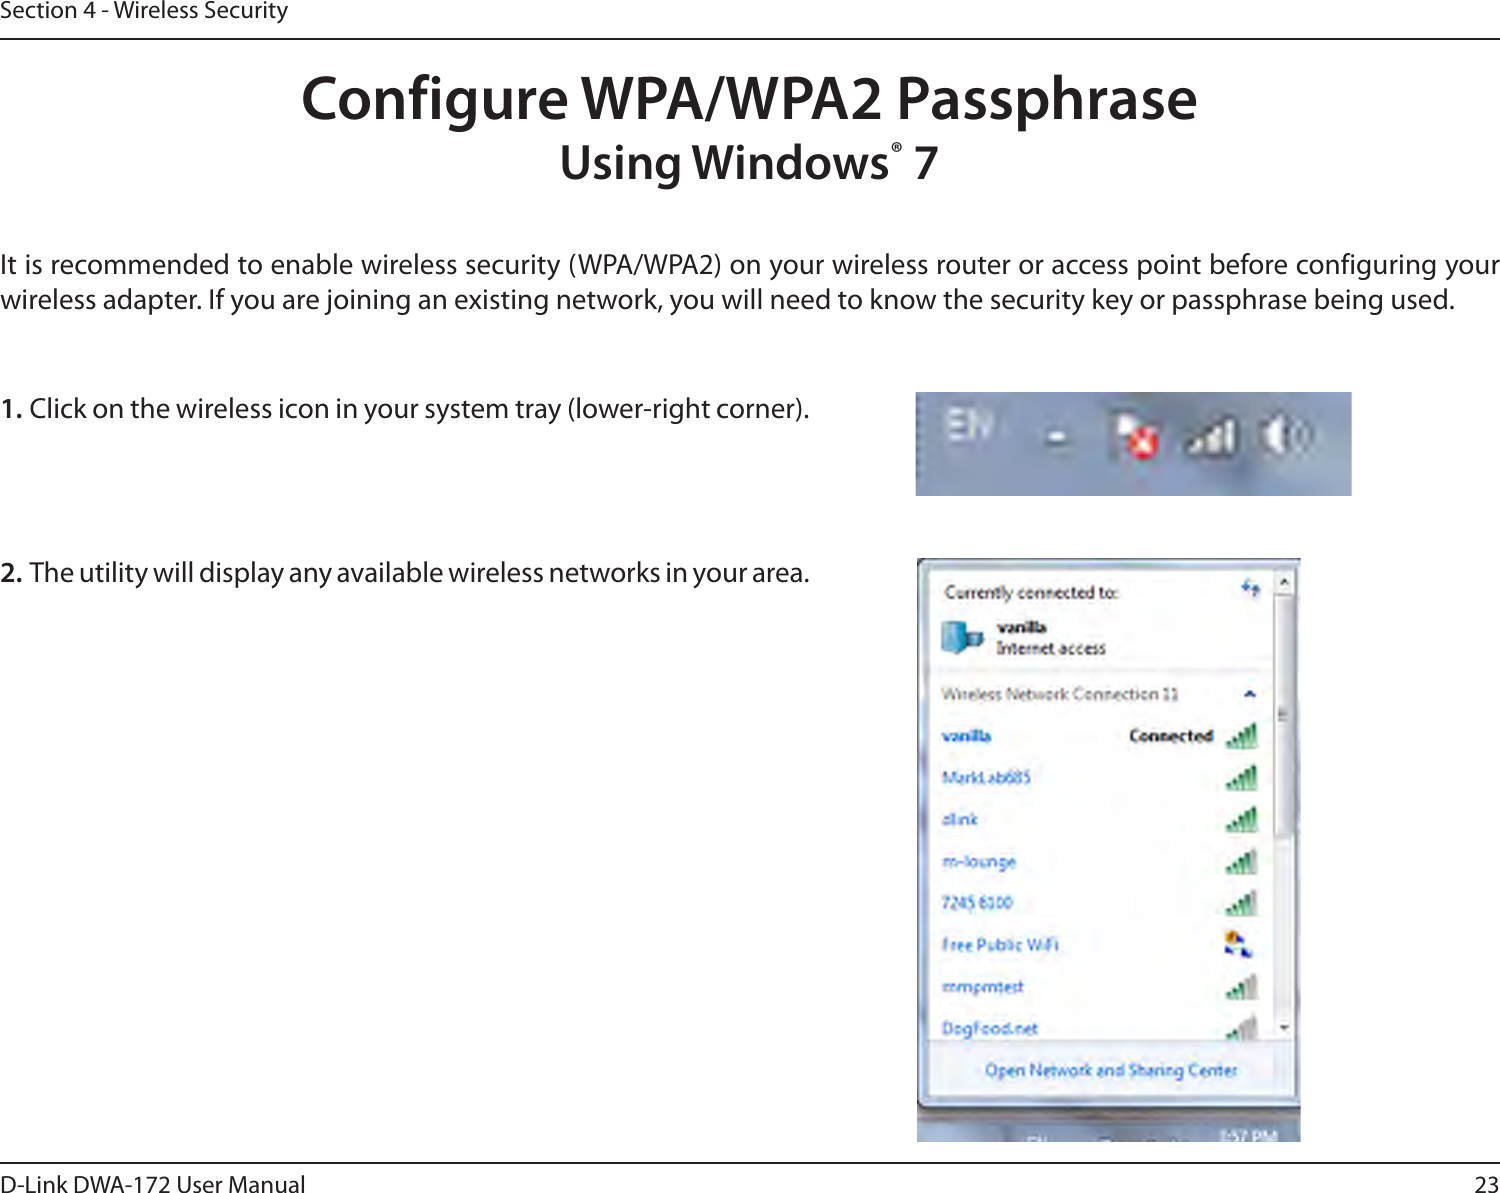 23D-Link DWA-172 User ManualSection 4 - Wireless SecurityConfigure WPA/WPA2 PassphraseUsing Windows® 7It is recommended to enable wireless security (WPA/WPA2) on your wireless router or access point before configuring your wireless adapter. If you are joining an existing network, you will need to know the security key or passphrase being used.2. The utility will display any available wireless networks in your area.1. Click on the wireless icon in your system tray (lower-right corner).